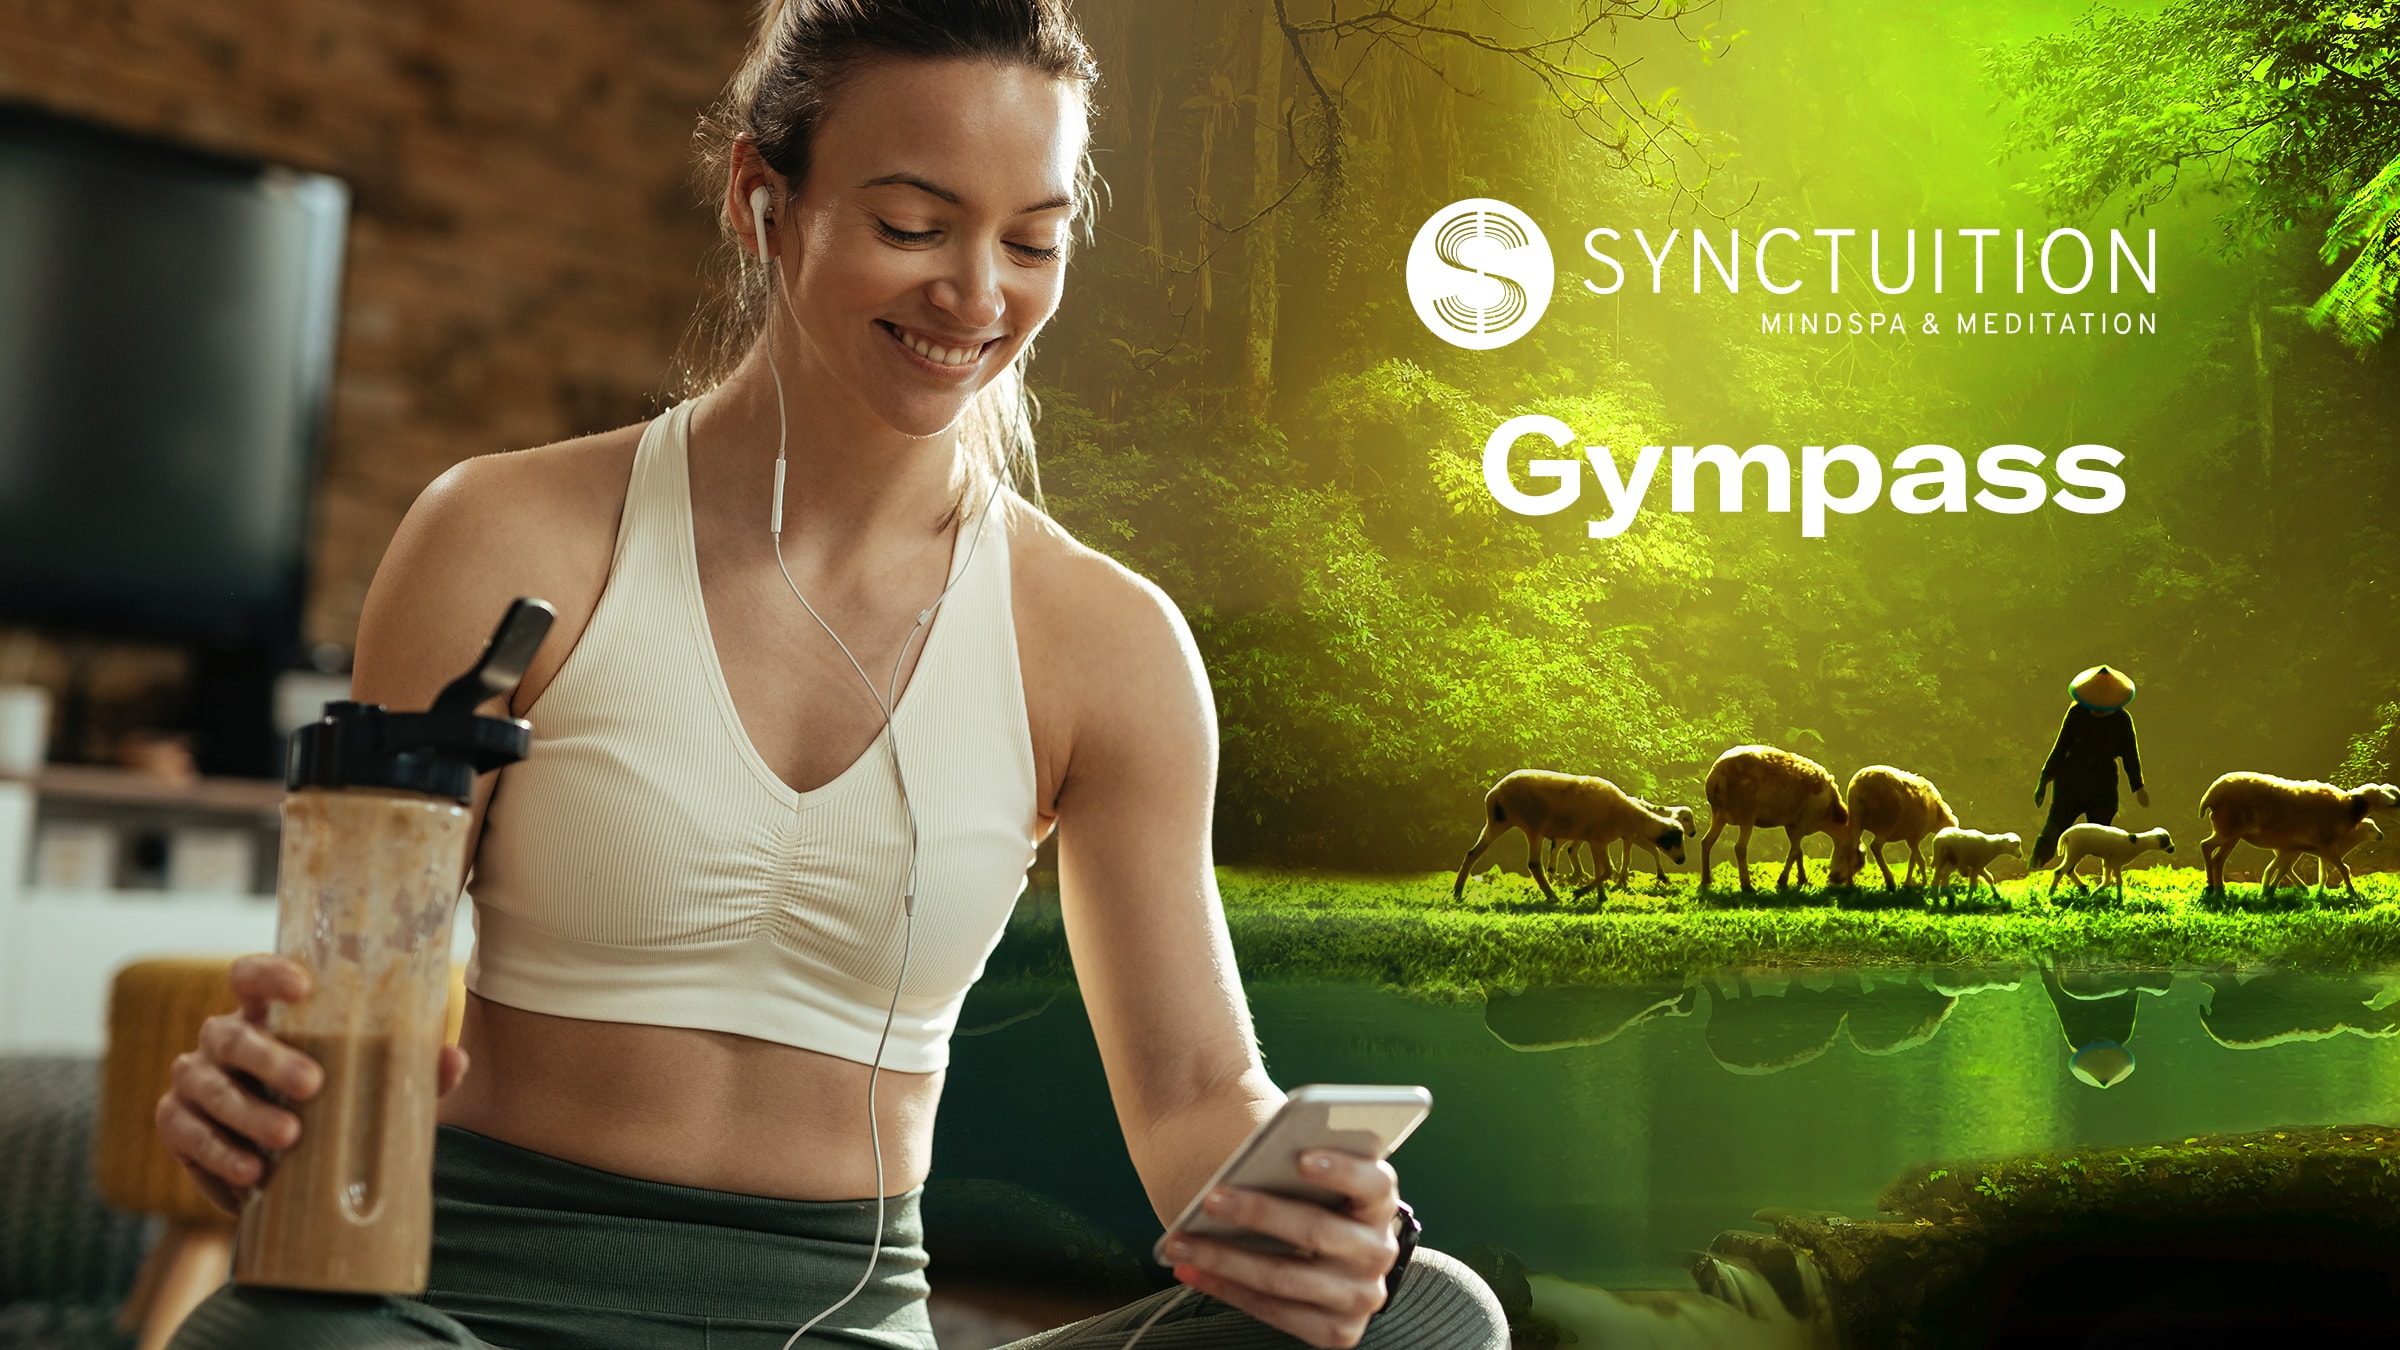 Gympass – Apps no Google Play